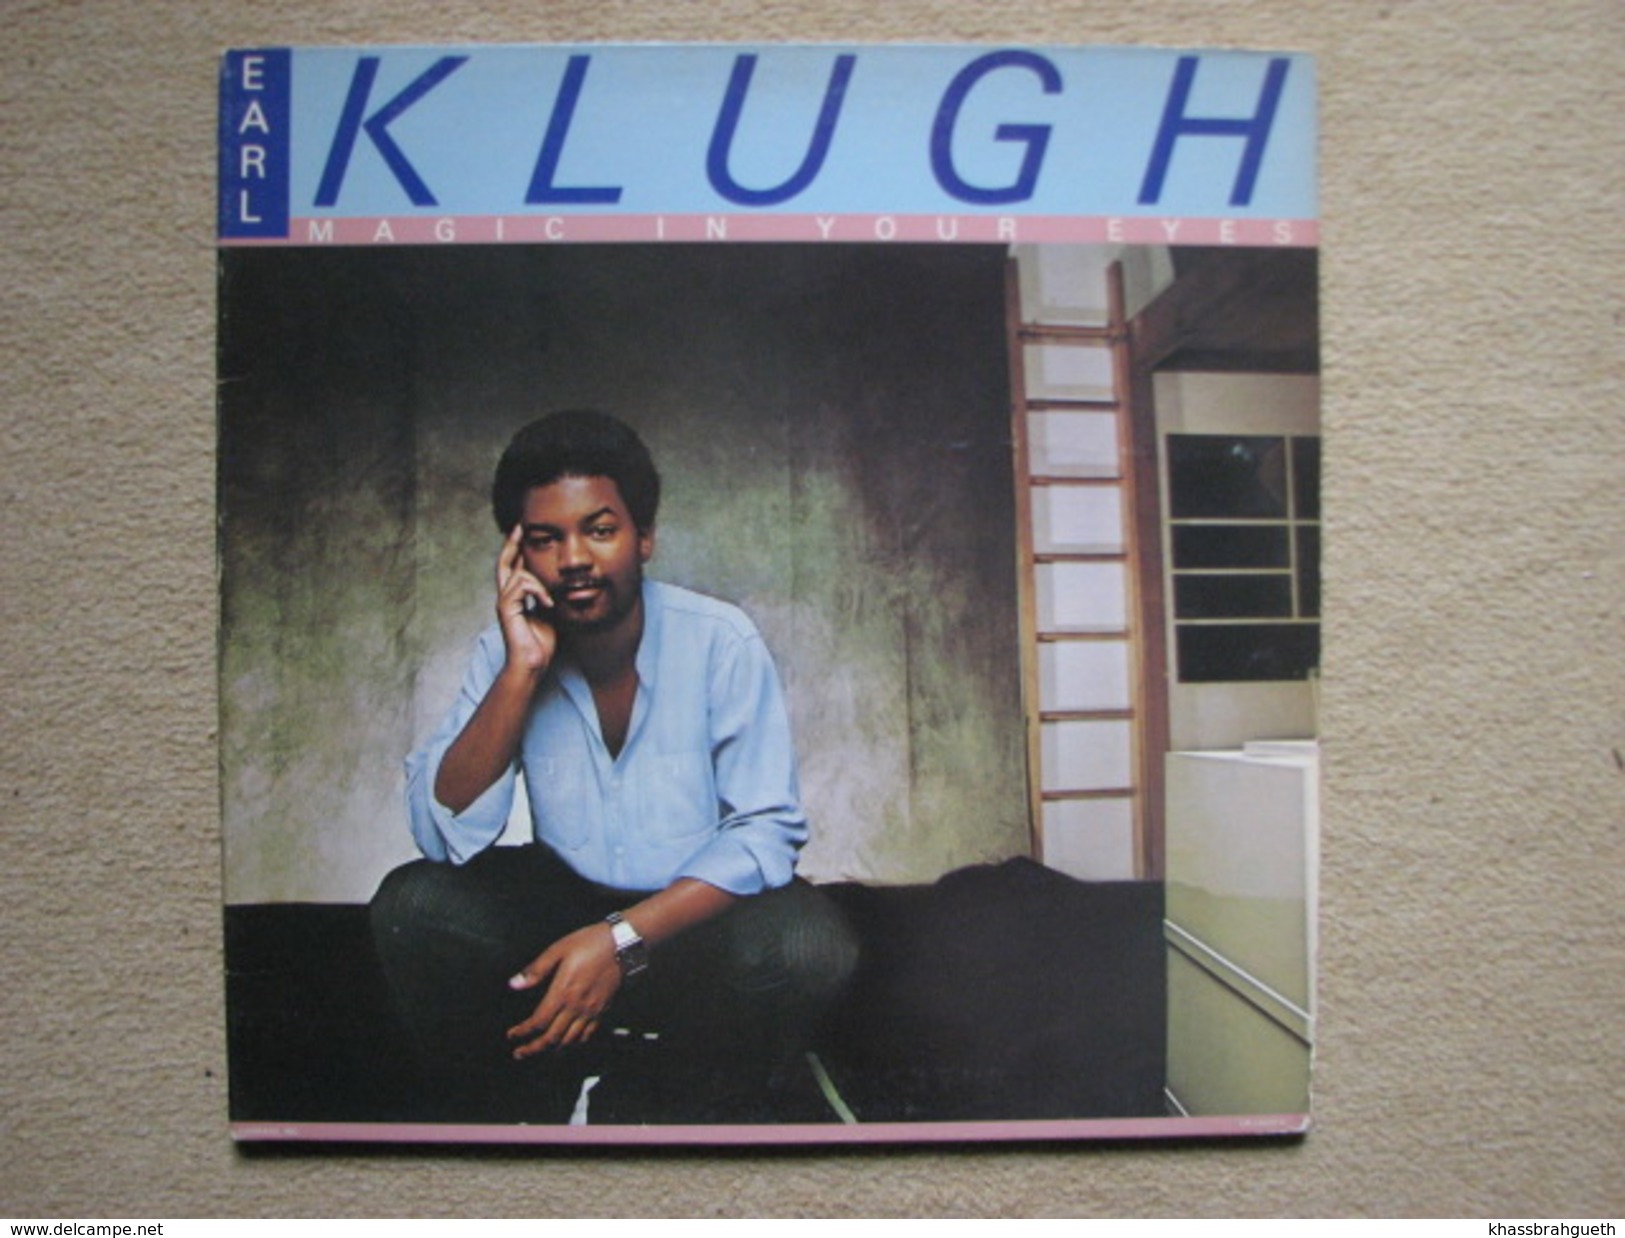 EARL KLUGH - MAGIC IN YOUR EYES (LP) - UNITED ARTISTS MUSIC (1978) - Jazz